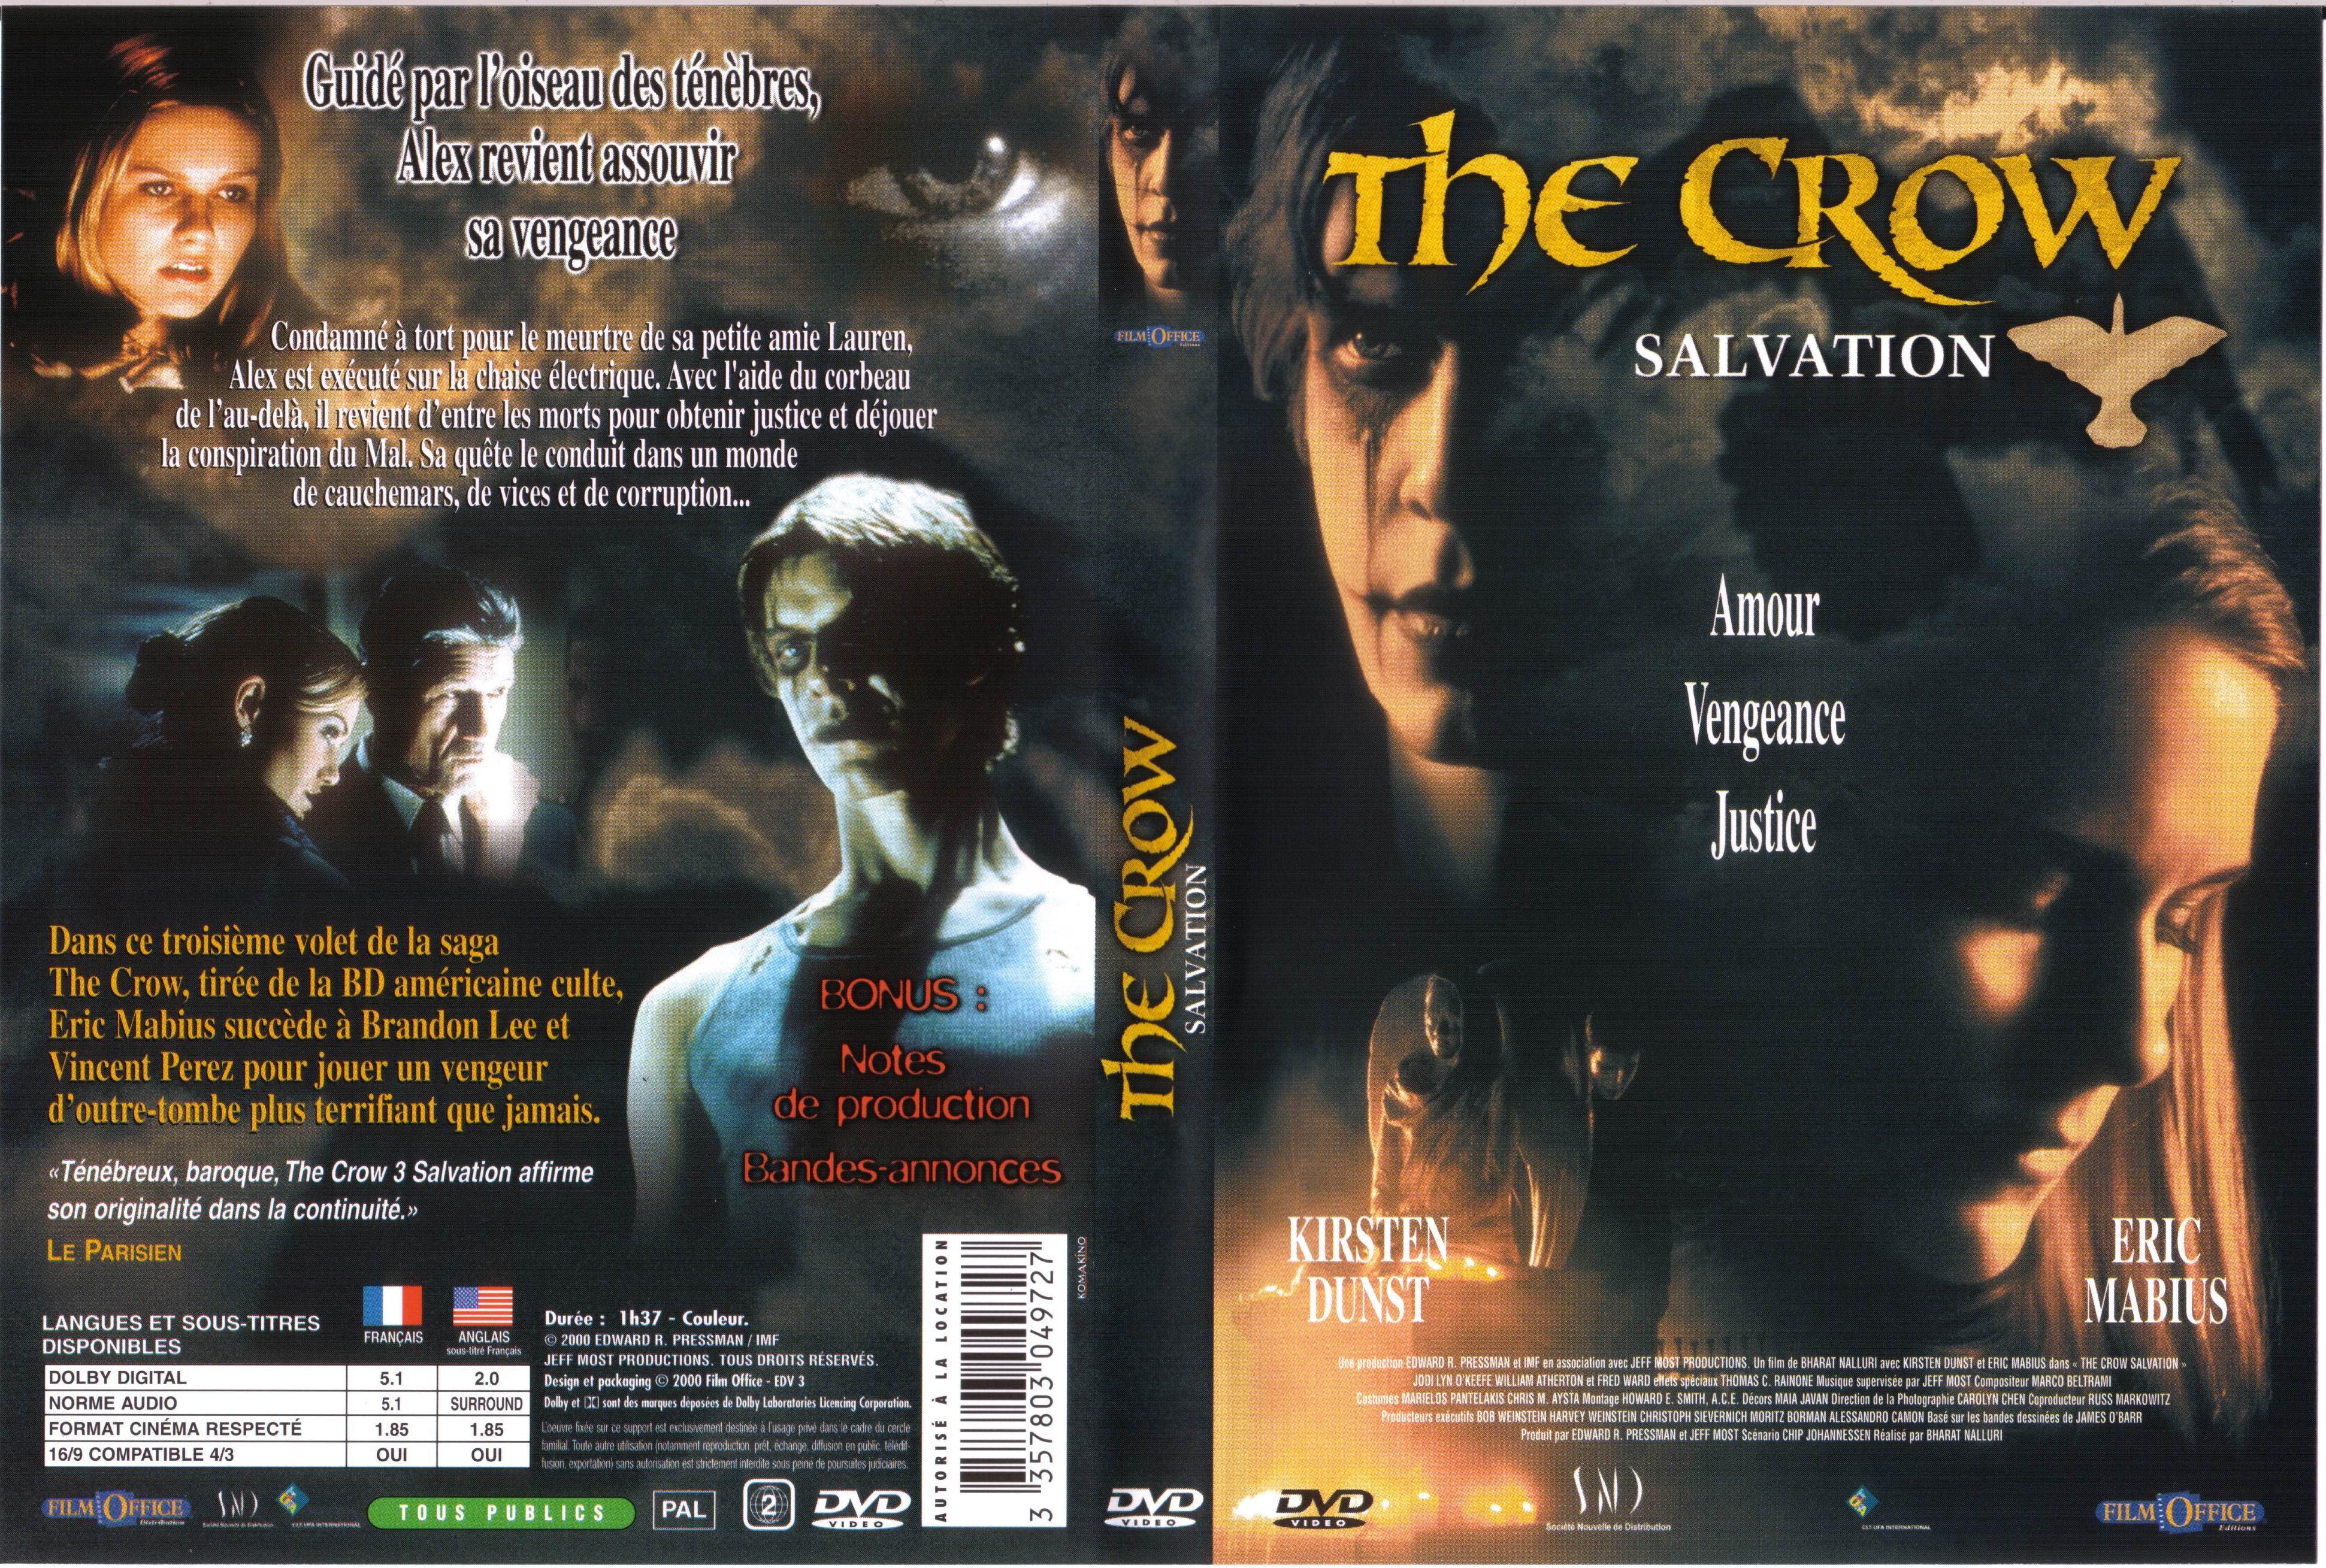 Jaquette DVD The crow salvation